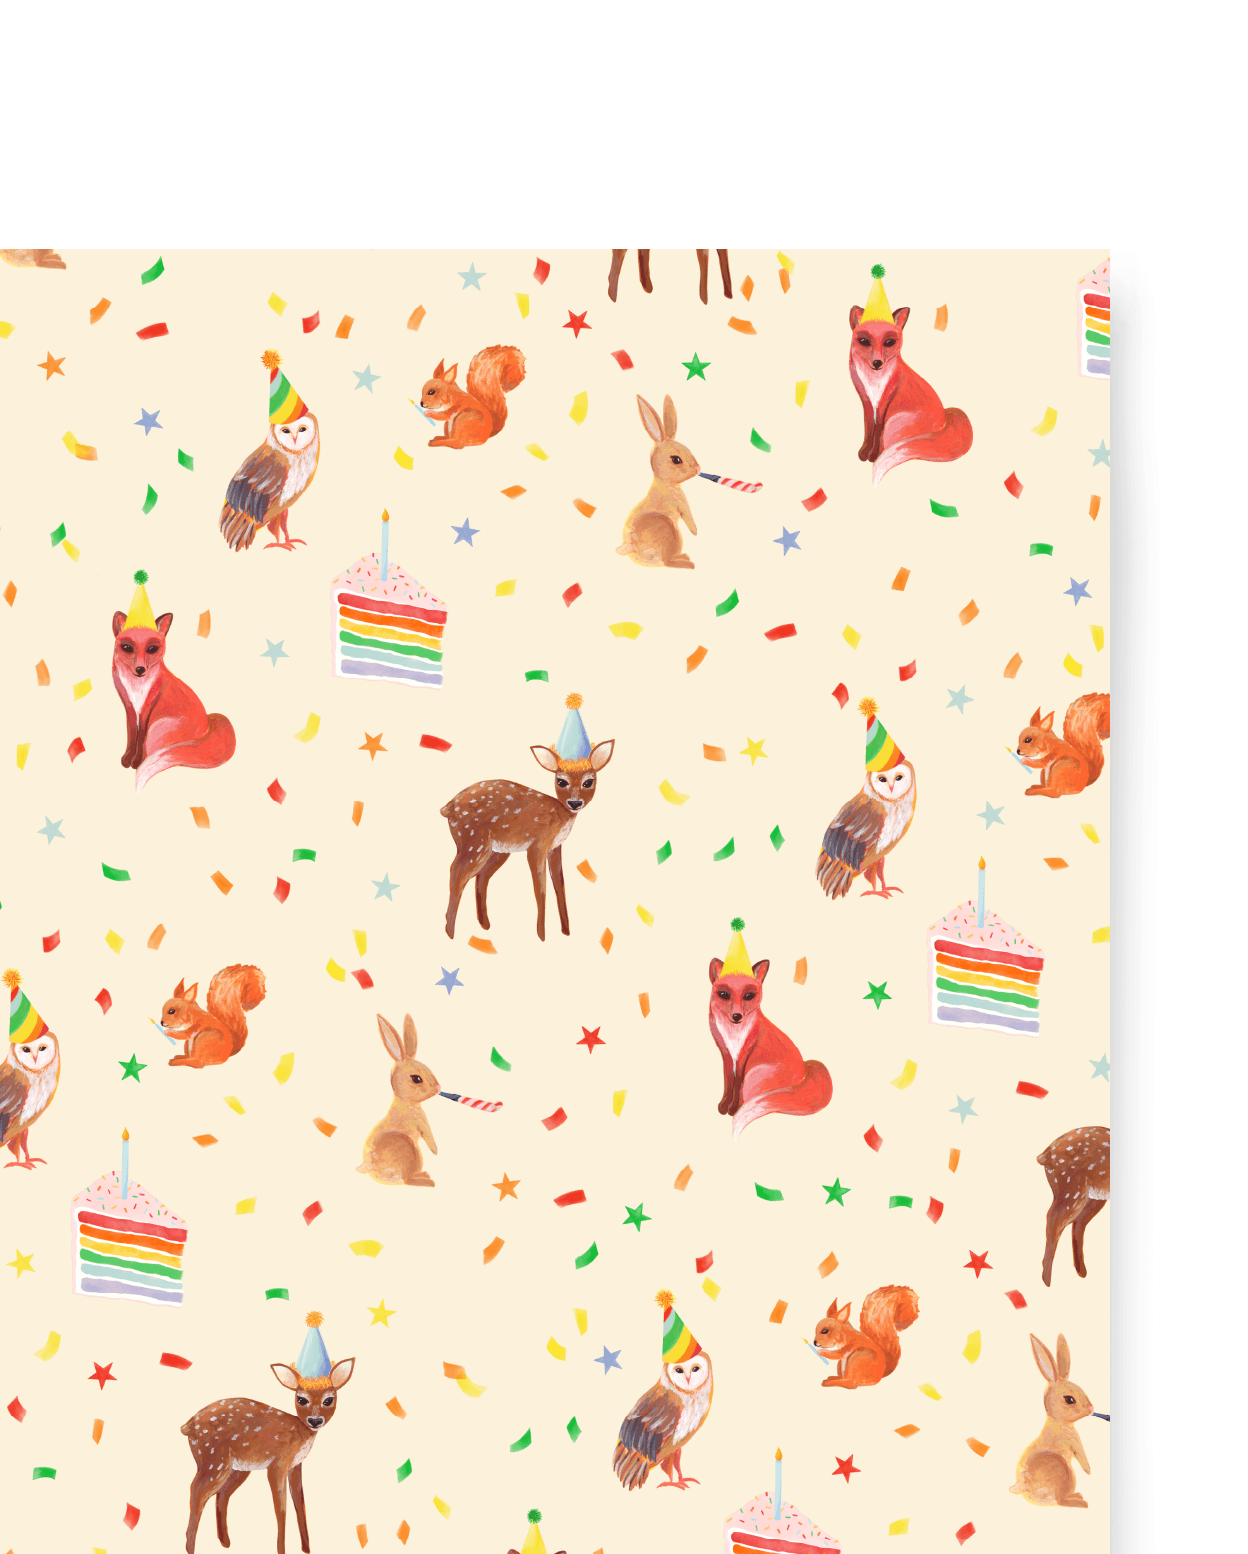 Forest creatures (squirrels, deer, foxes, owls, bunnies) adorned with party hats of various colors surrounded by rainbow confetti, rainbow stars, and rainbow cake!